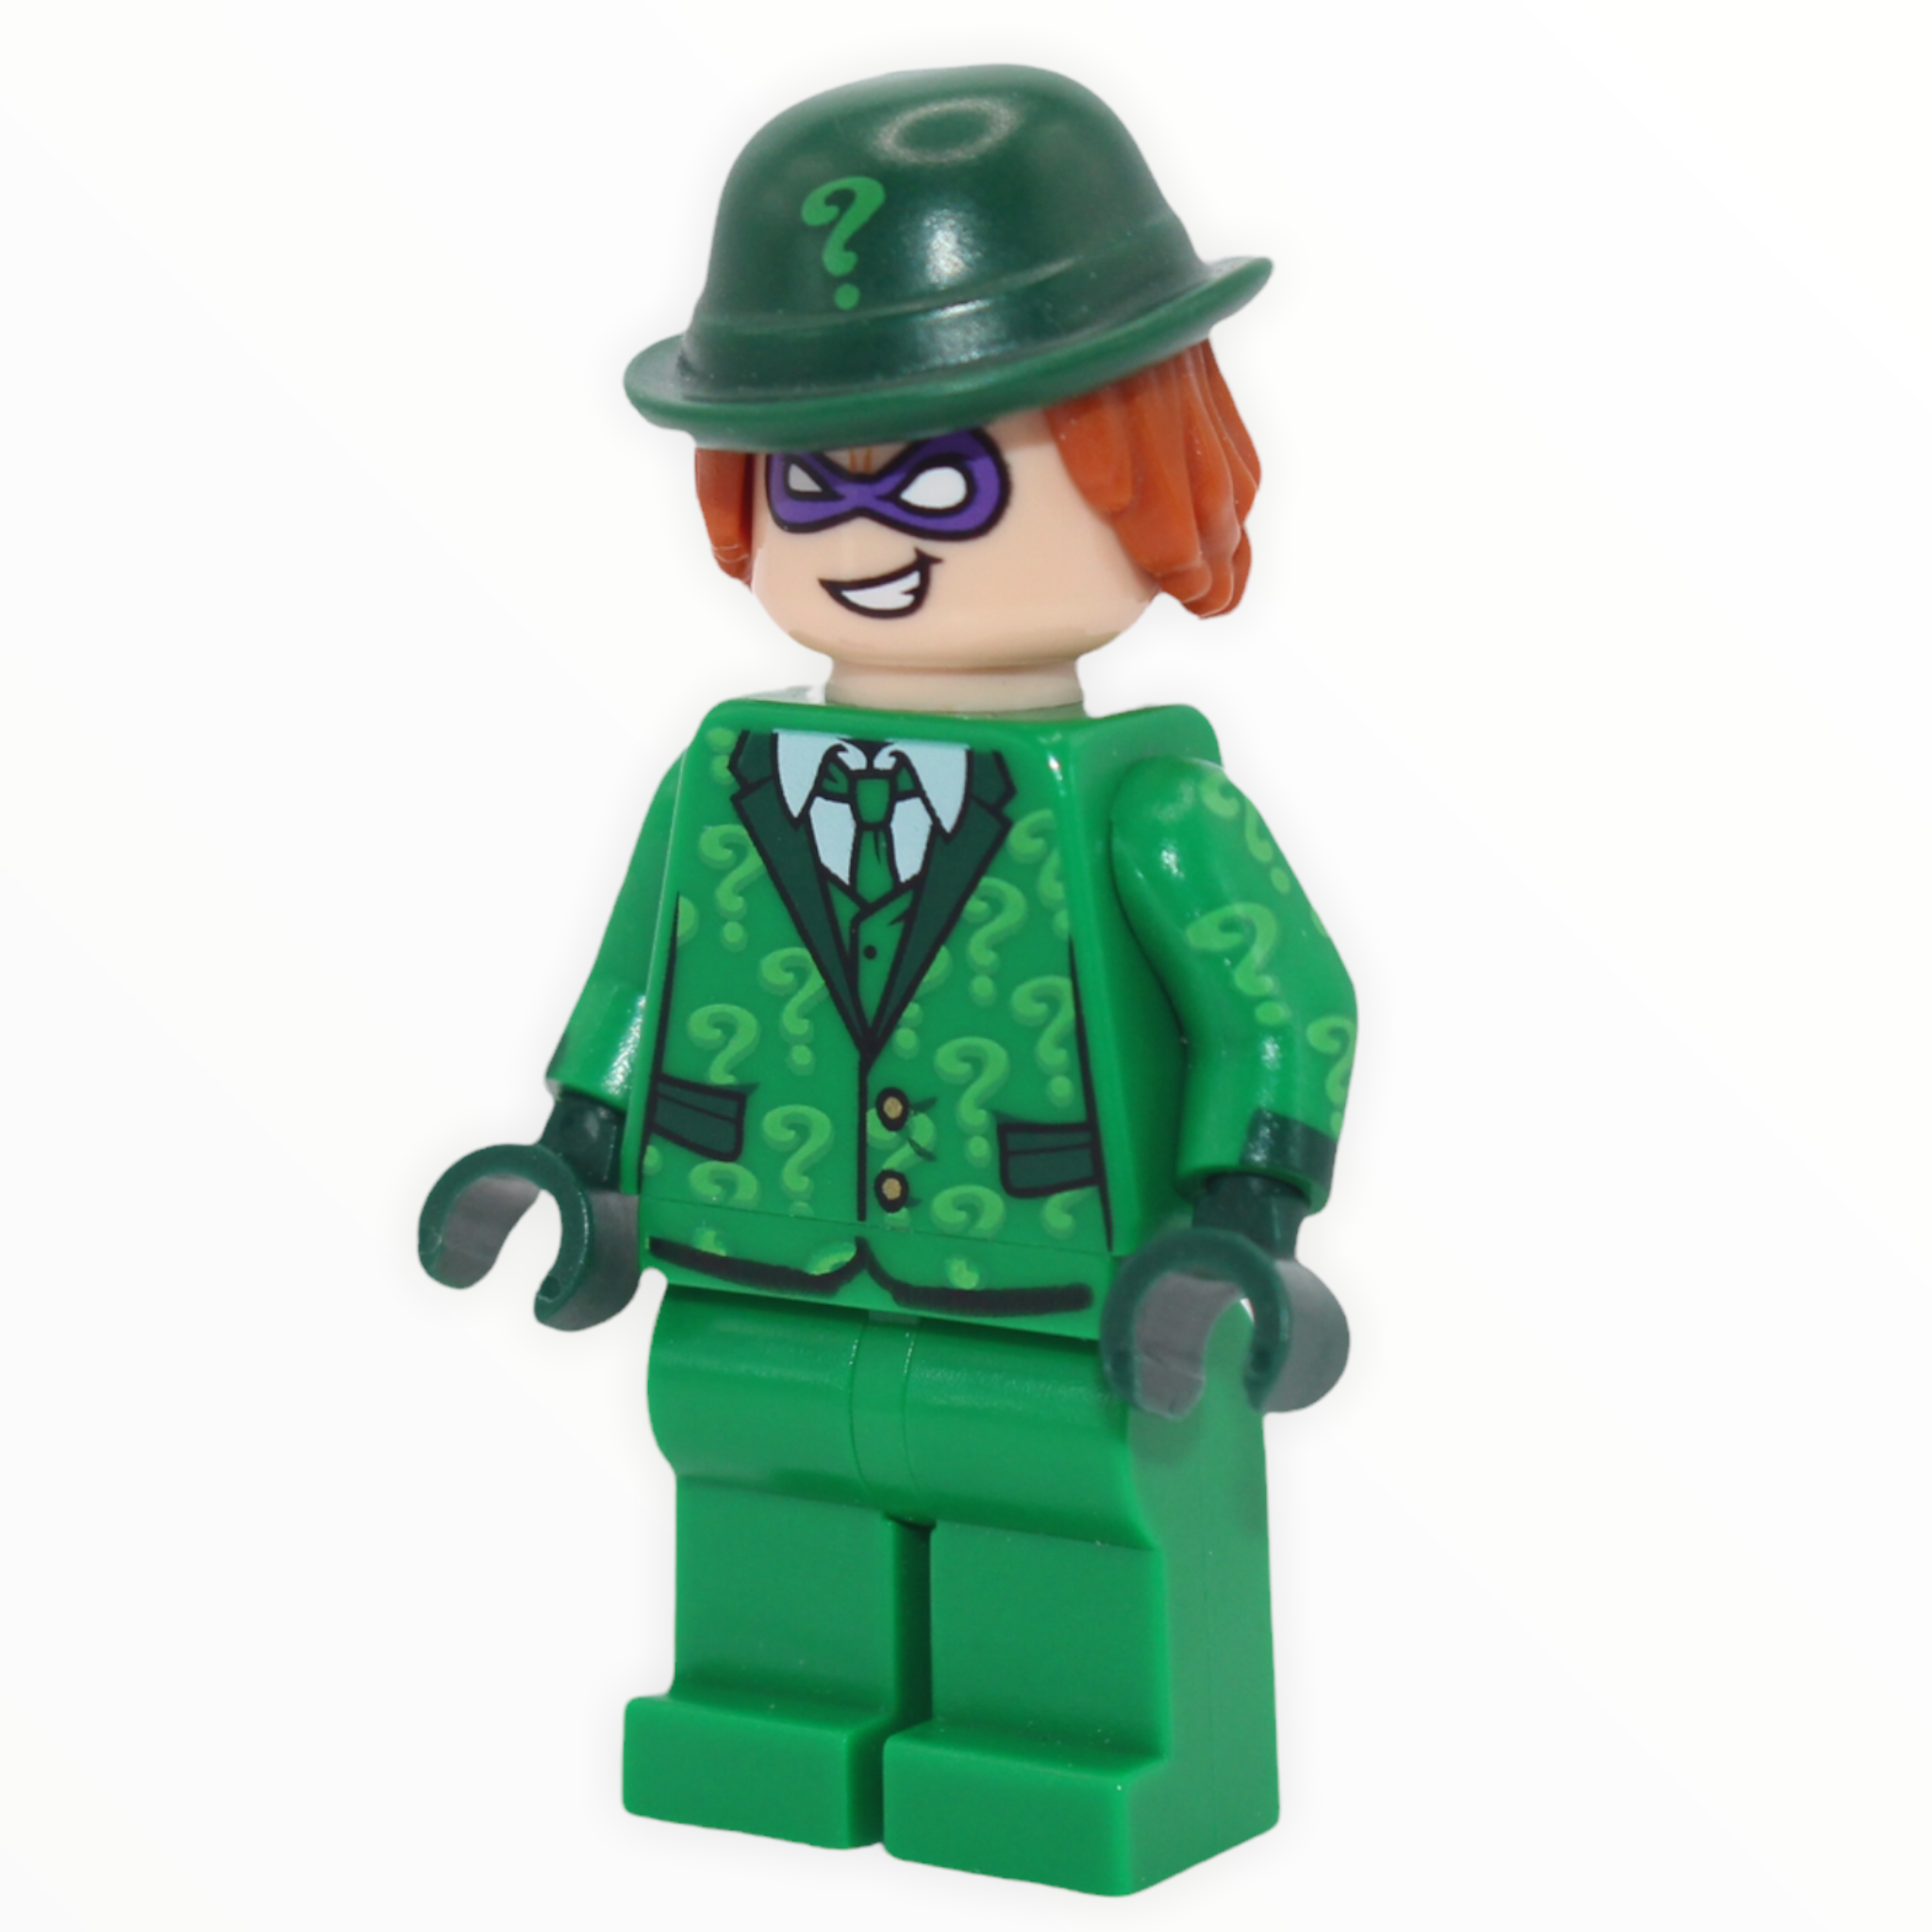 The Riddler (LEGO Batman Movie, suit and tie, hat with hair)